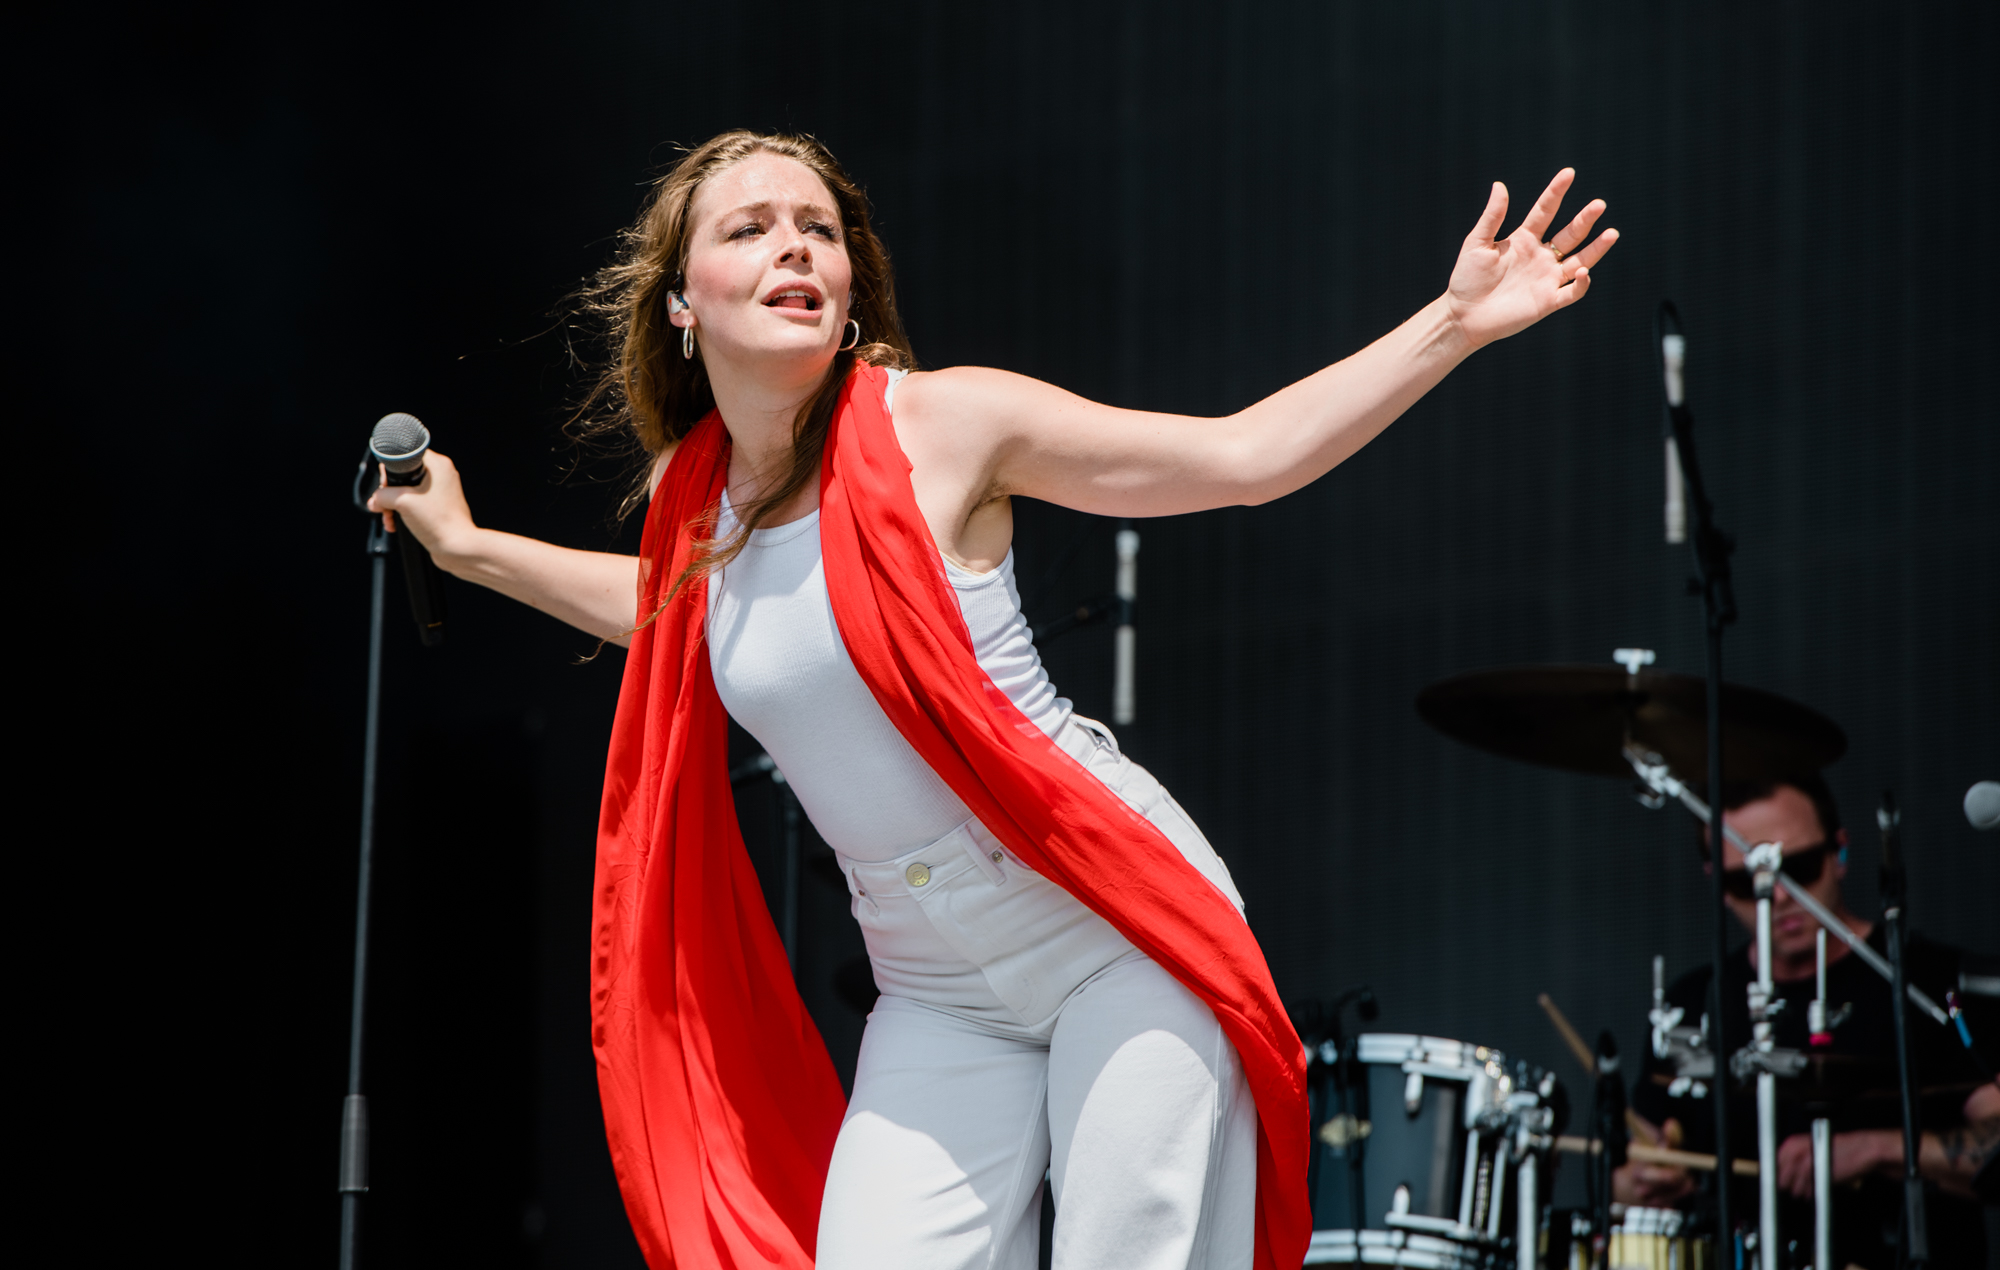 MAGGIE-ROGERS-ANDY-HUGHES-NME-GLASTO19-5137